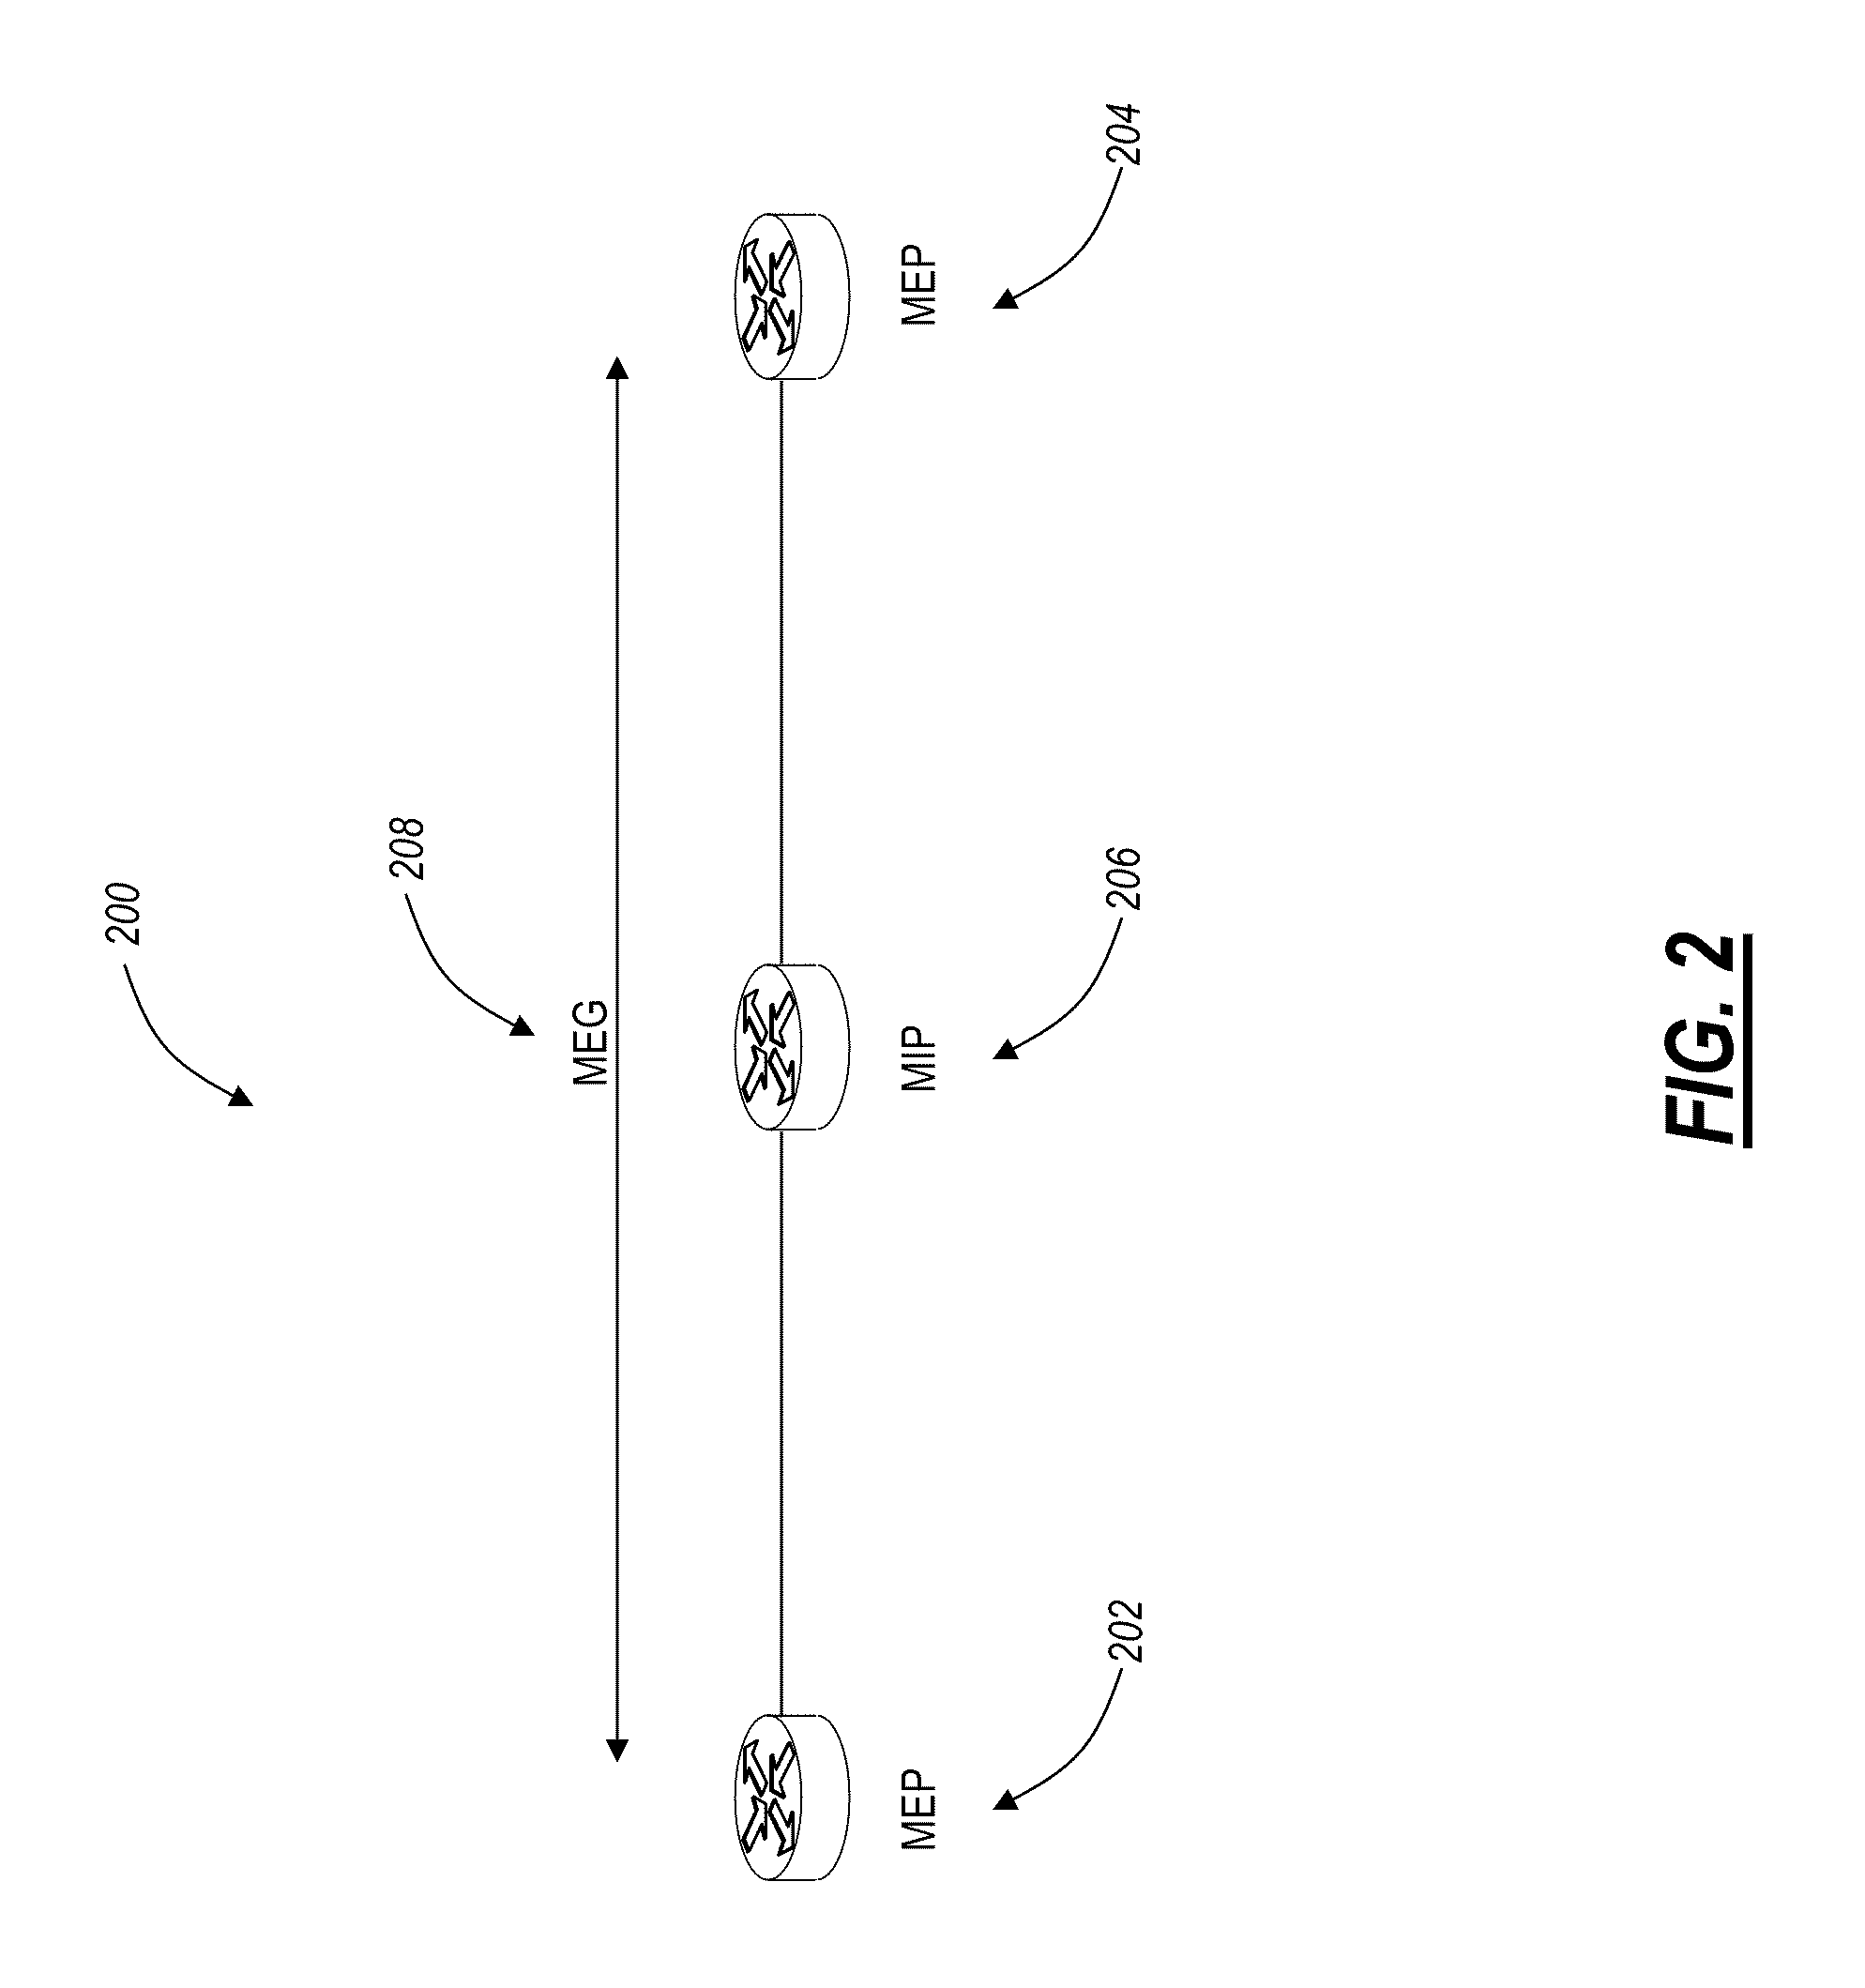 Systems and methods for connectivity fault management extensions for automated activation of services through association of service related attributes